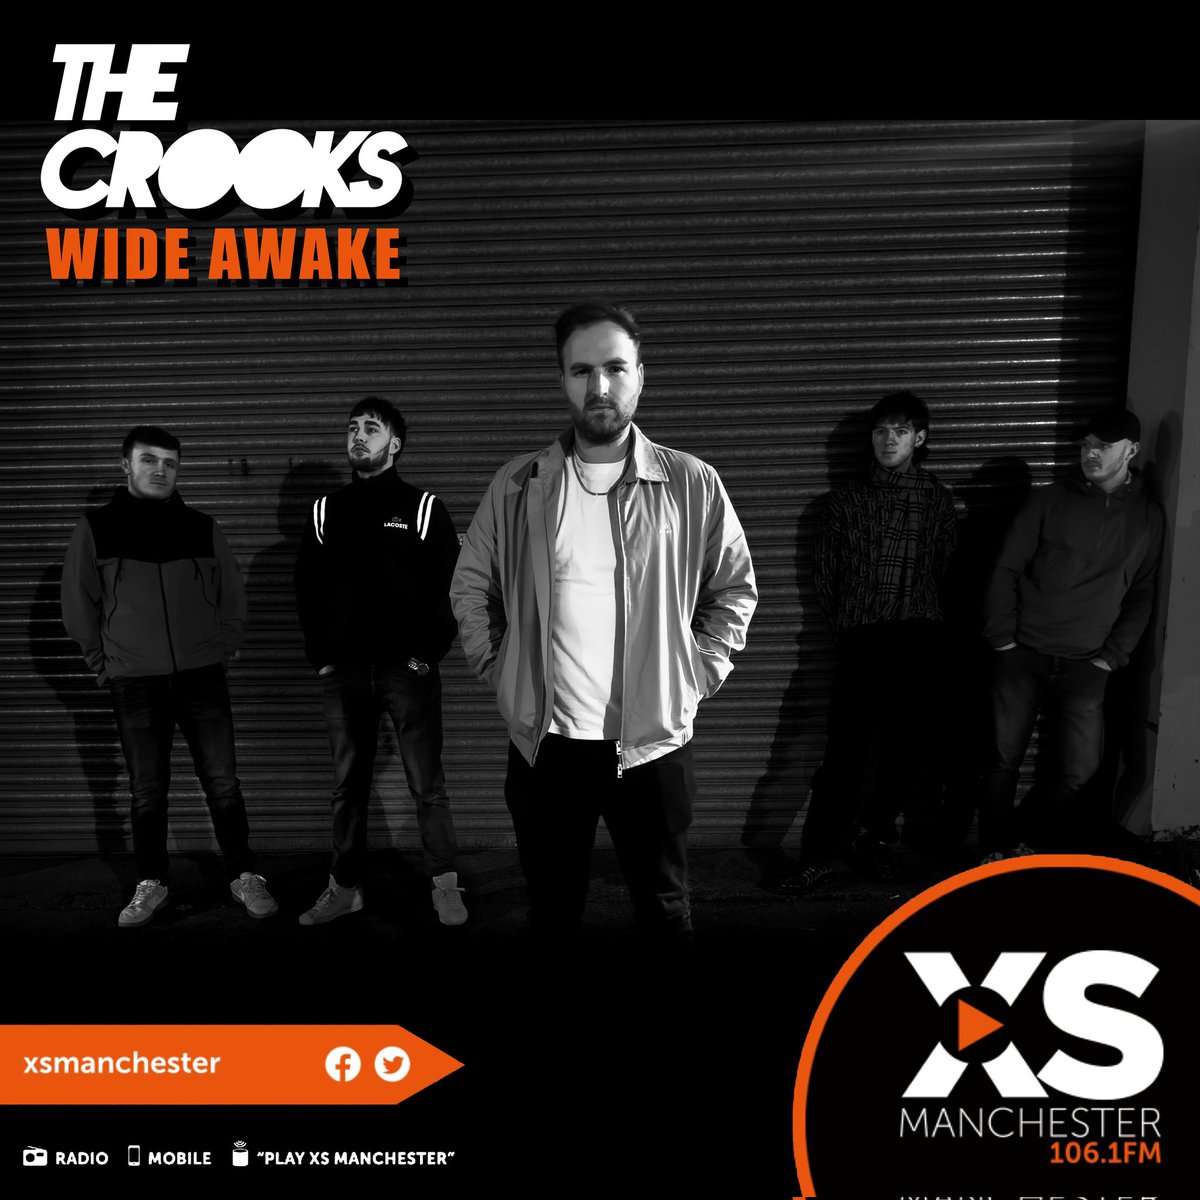 Thank you @Mr_Jimbob for featuring our latest single Wide Awake on @XSManchester Last remaining tickets for @nightanddaycafe available here: skiddle.com/whats-on/Manch…